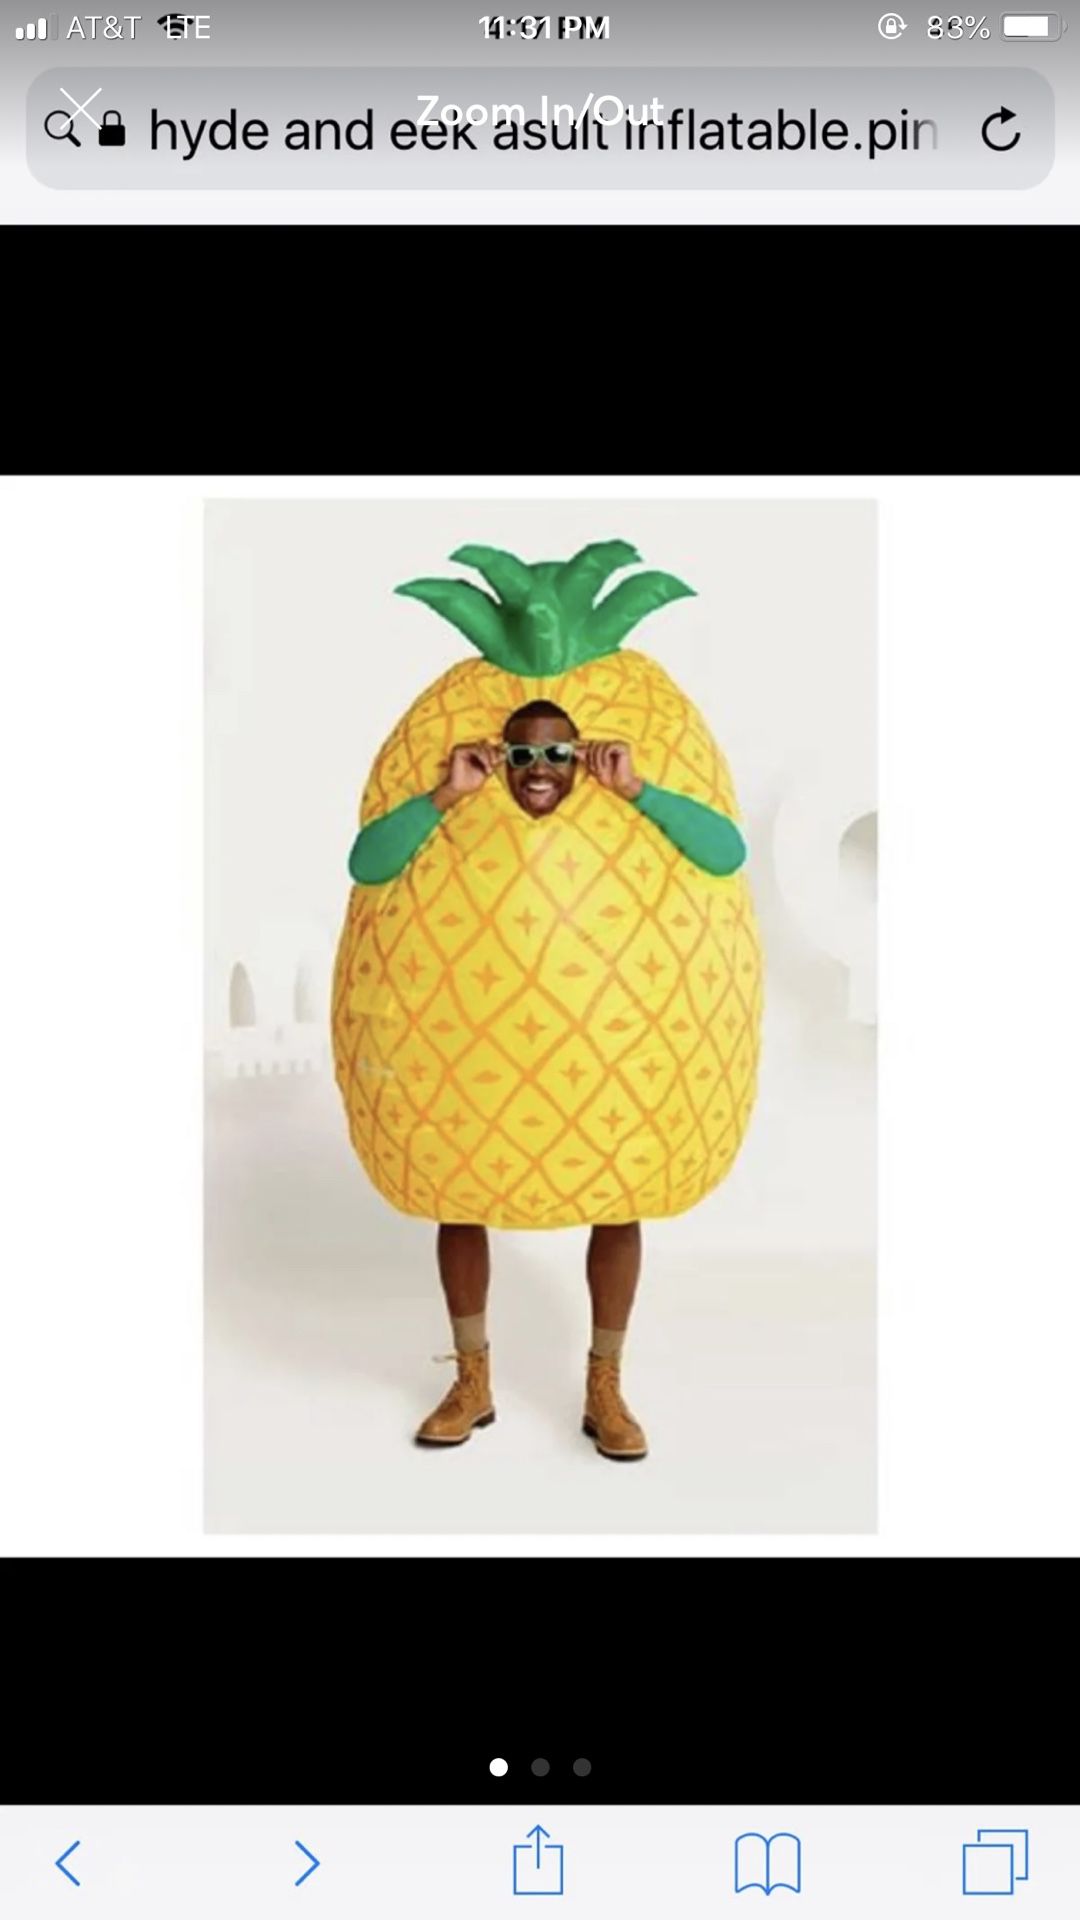 New Hyde and Eek Inflatable Pineapple Costume